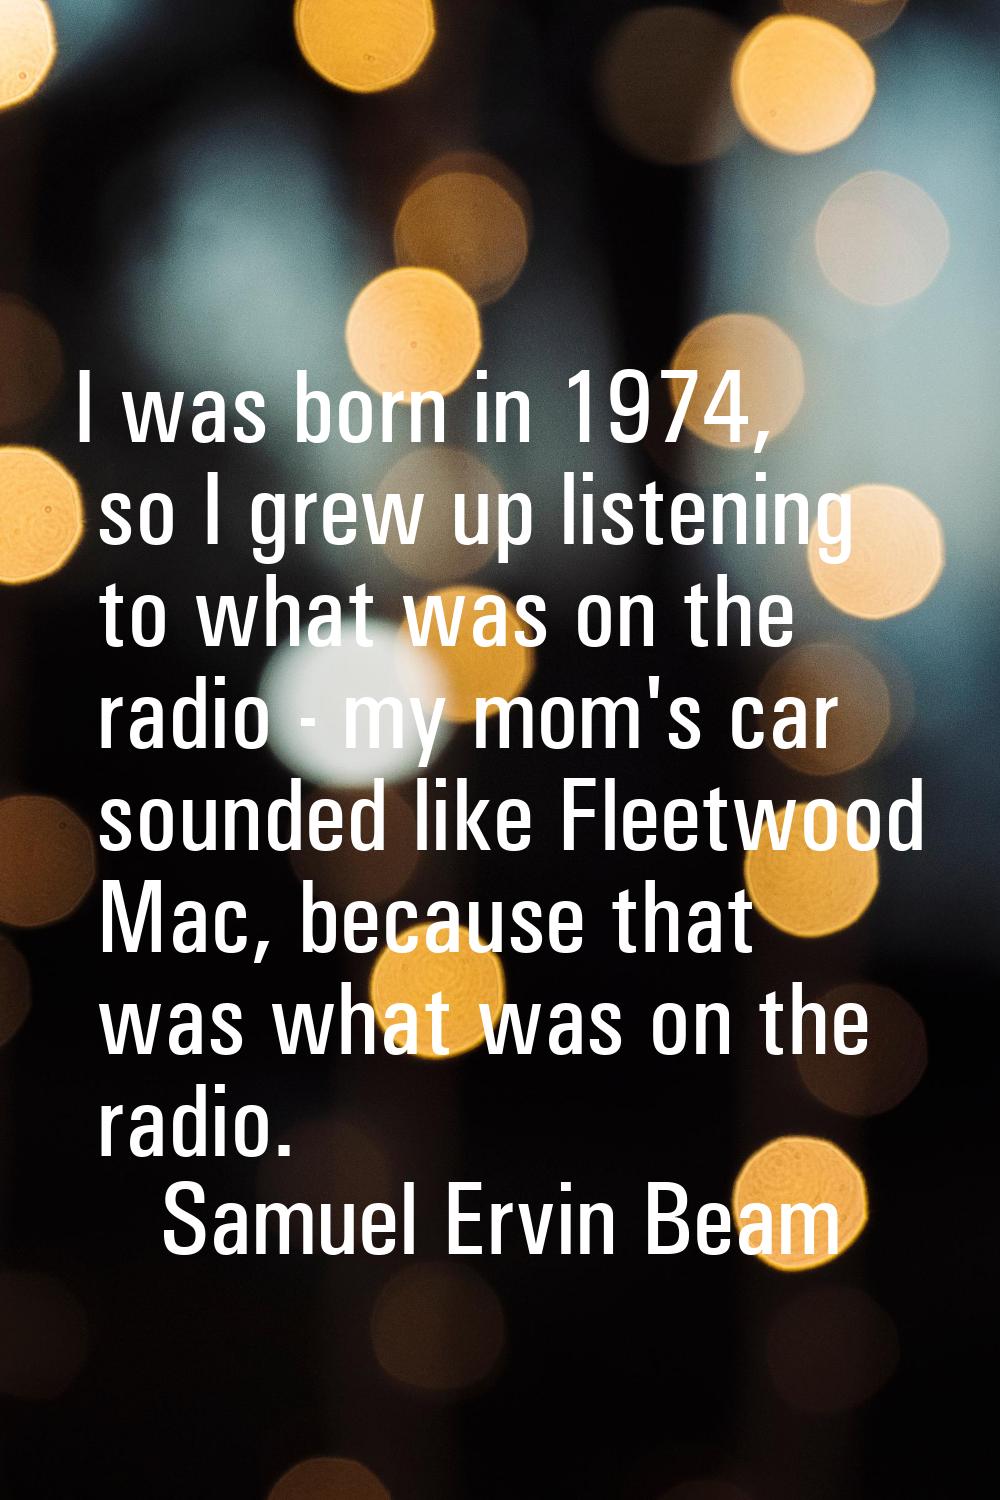 I was born in 1974, so I grew up listening to what was on the radio - my mom's car sounded like Fle